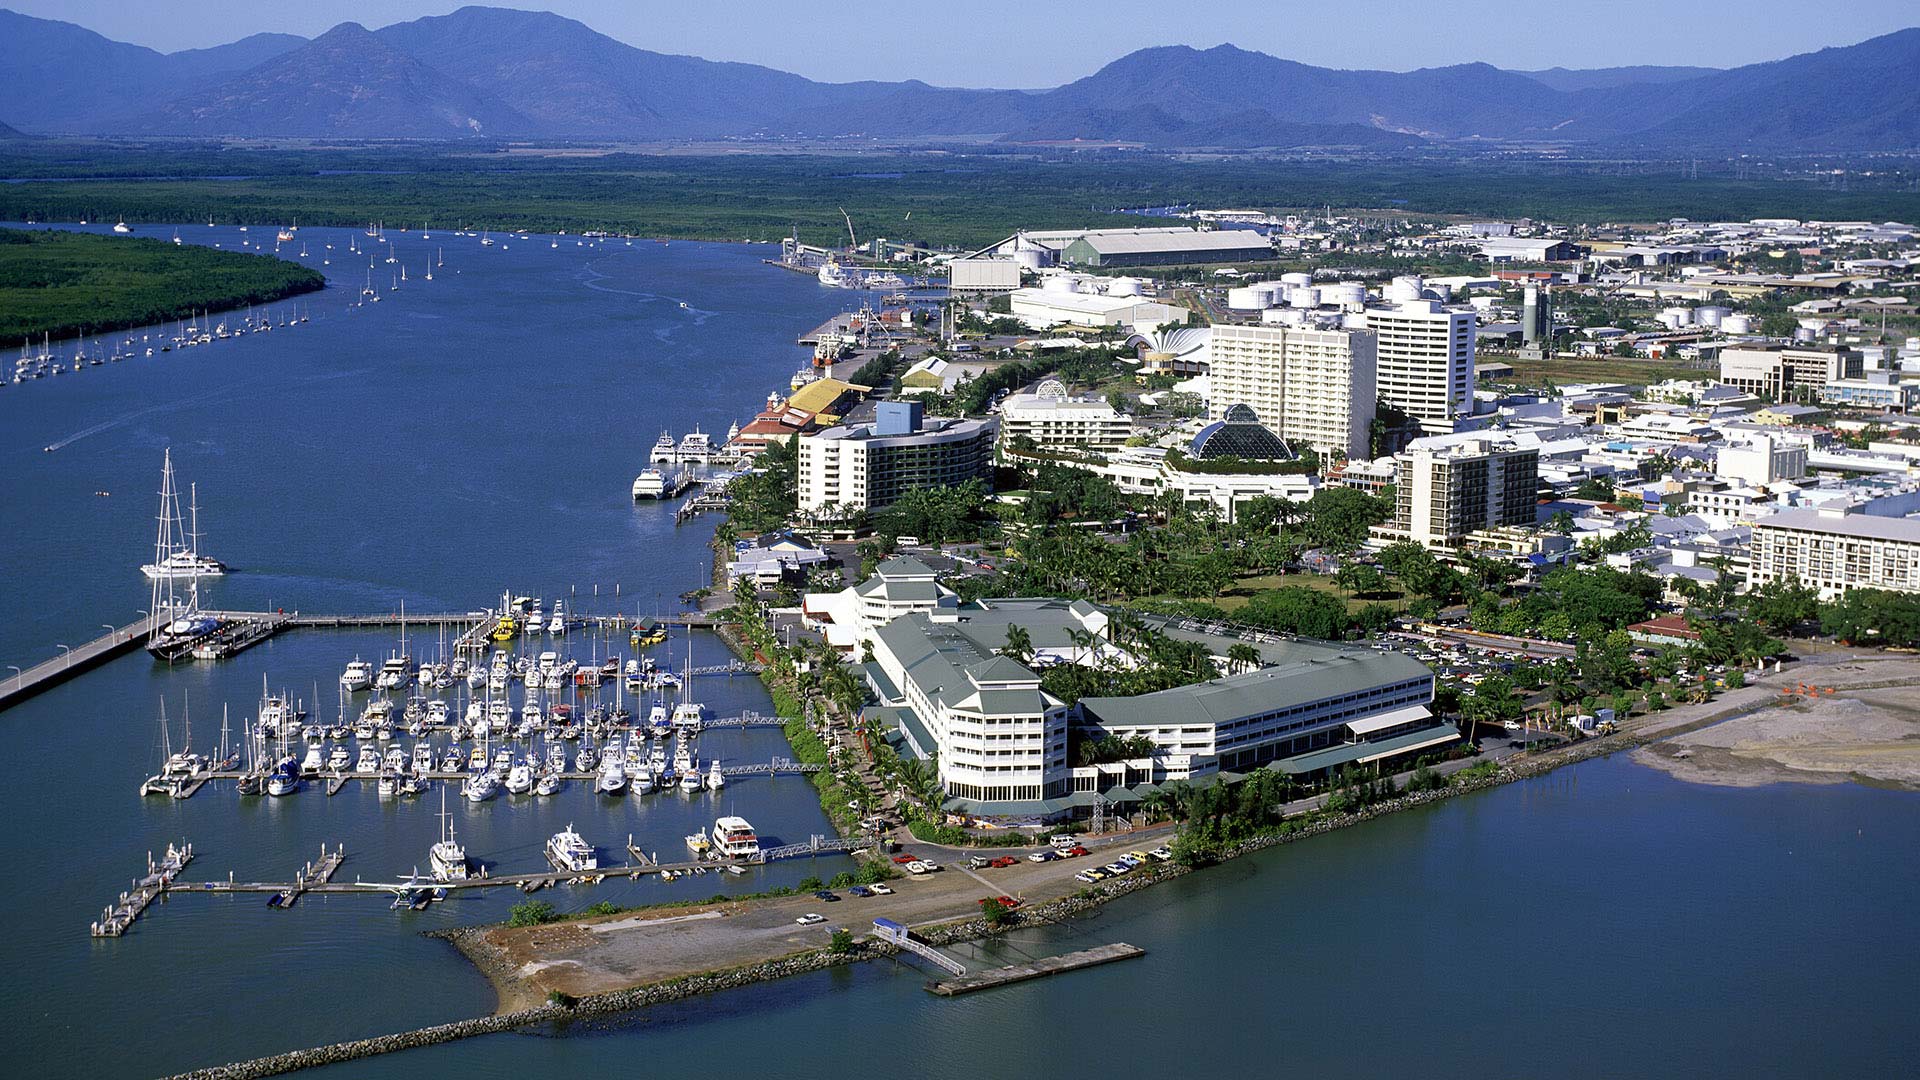 Panorama to illustrate dating in cairns